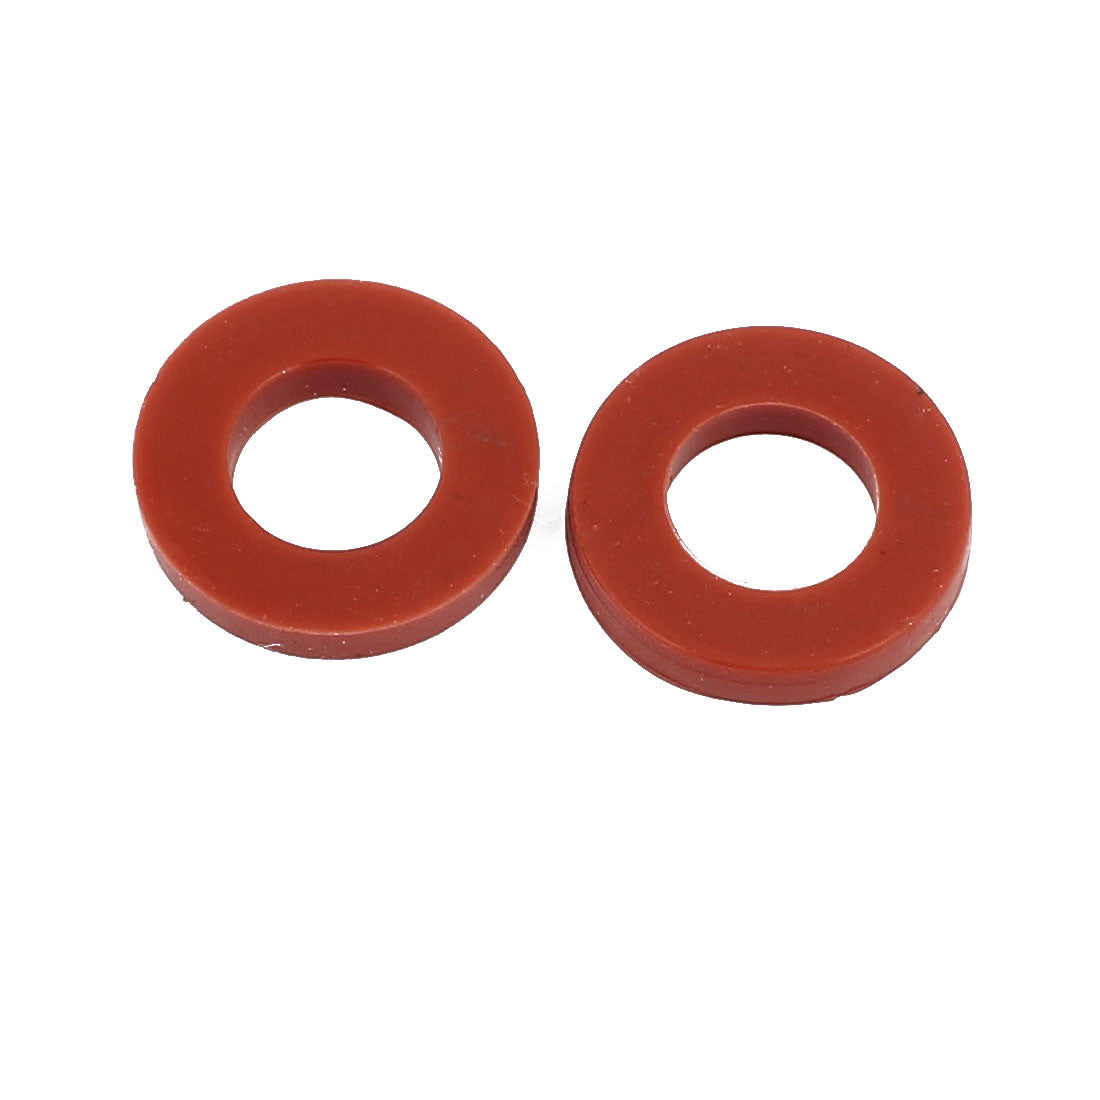 uxcell Uxcell 5pcs 19mm x 10mm x 3mm Silicone O Ring Seal Gaskets Red for Pipe Tube Hose